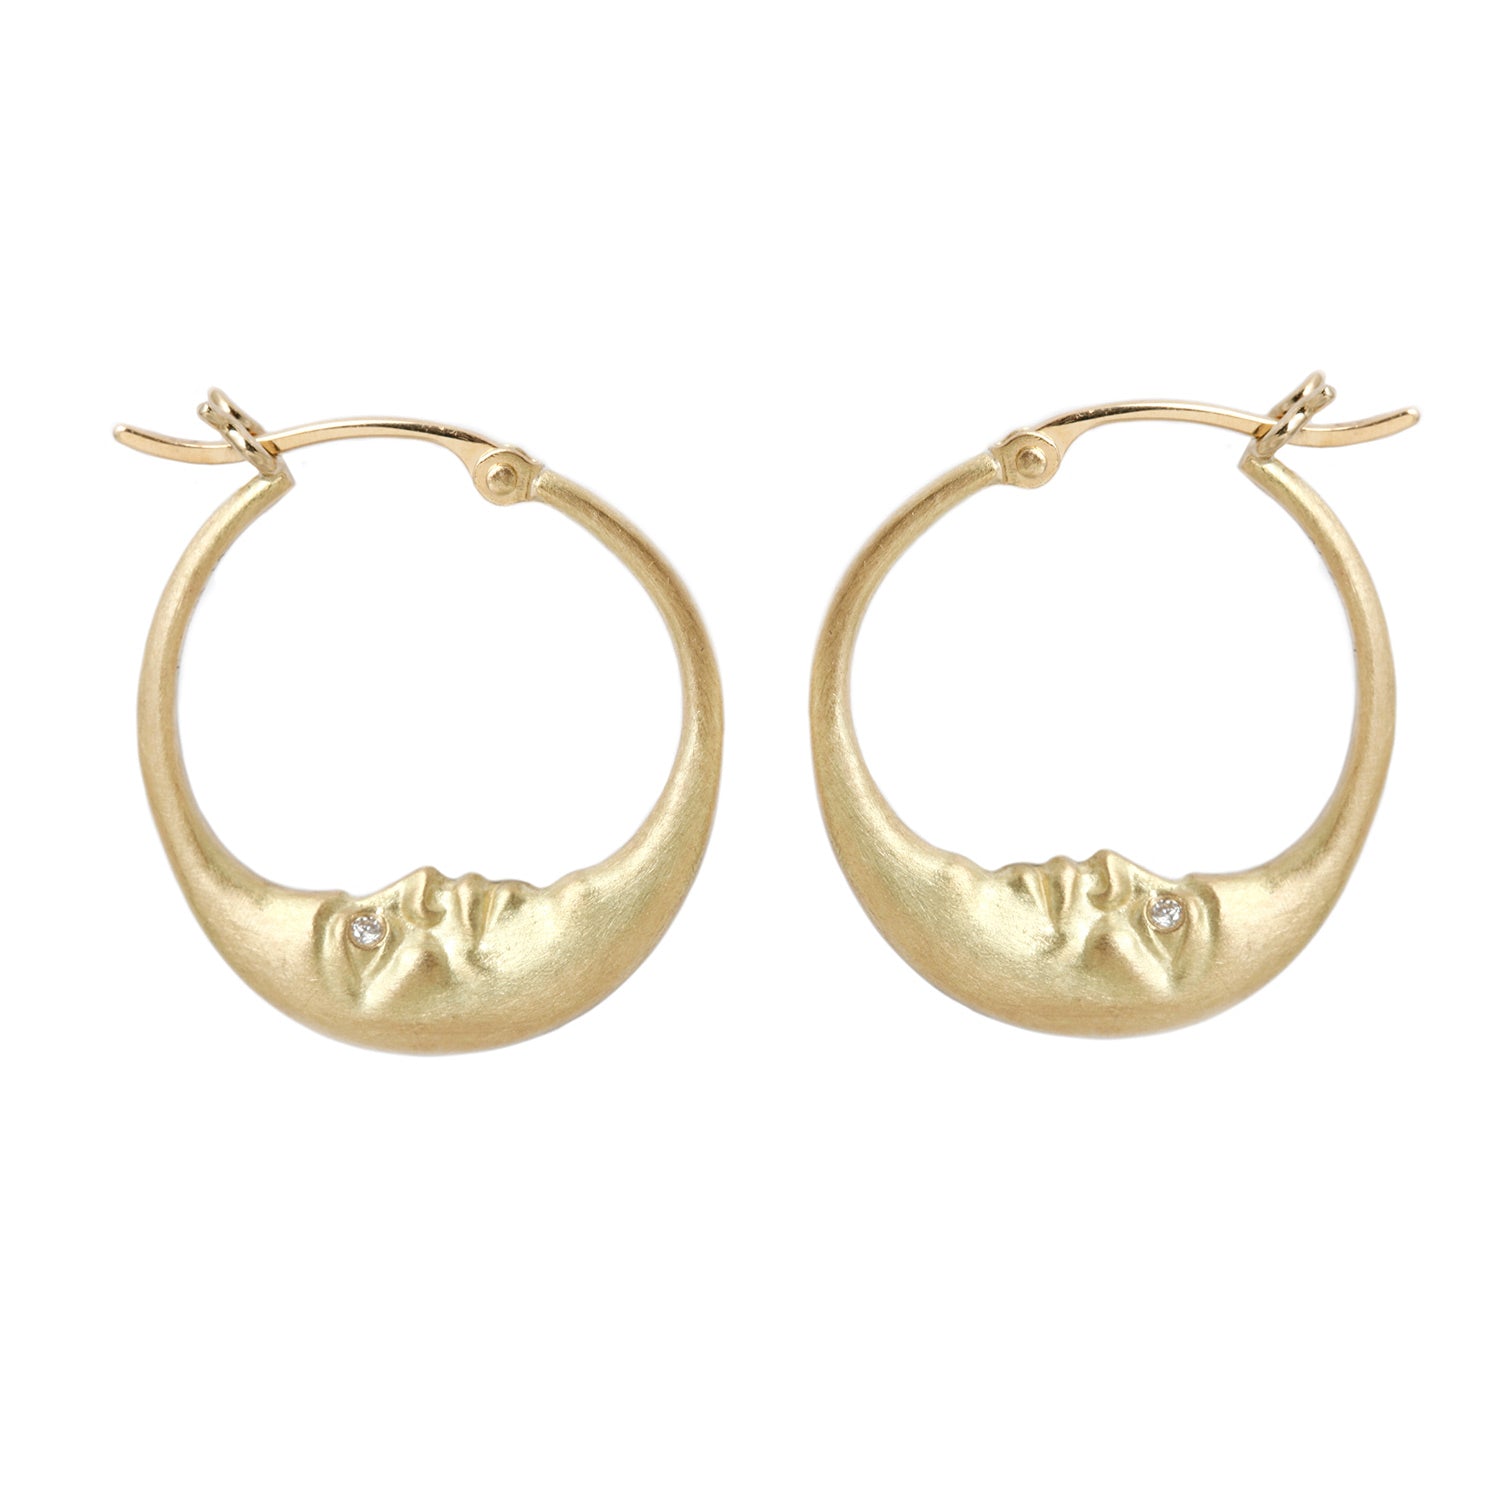 Anthony Lent Gold Crescent Moon Hoop Earrings